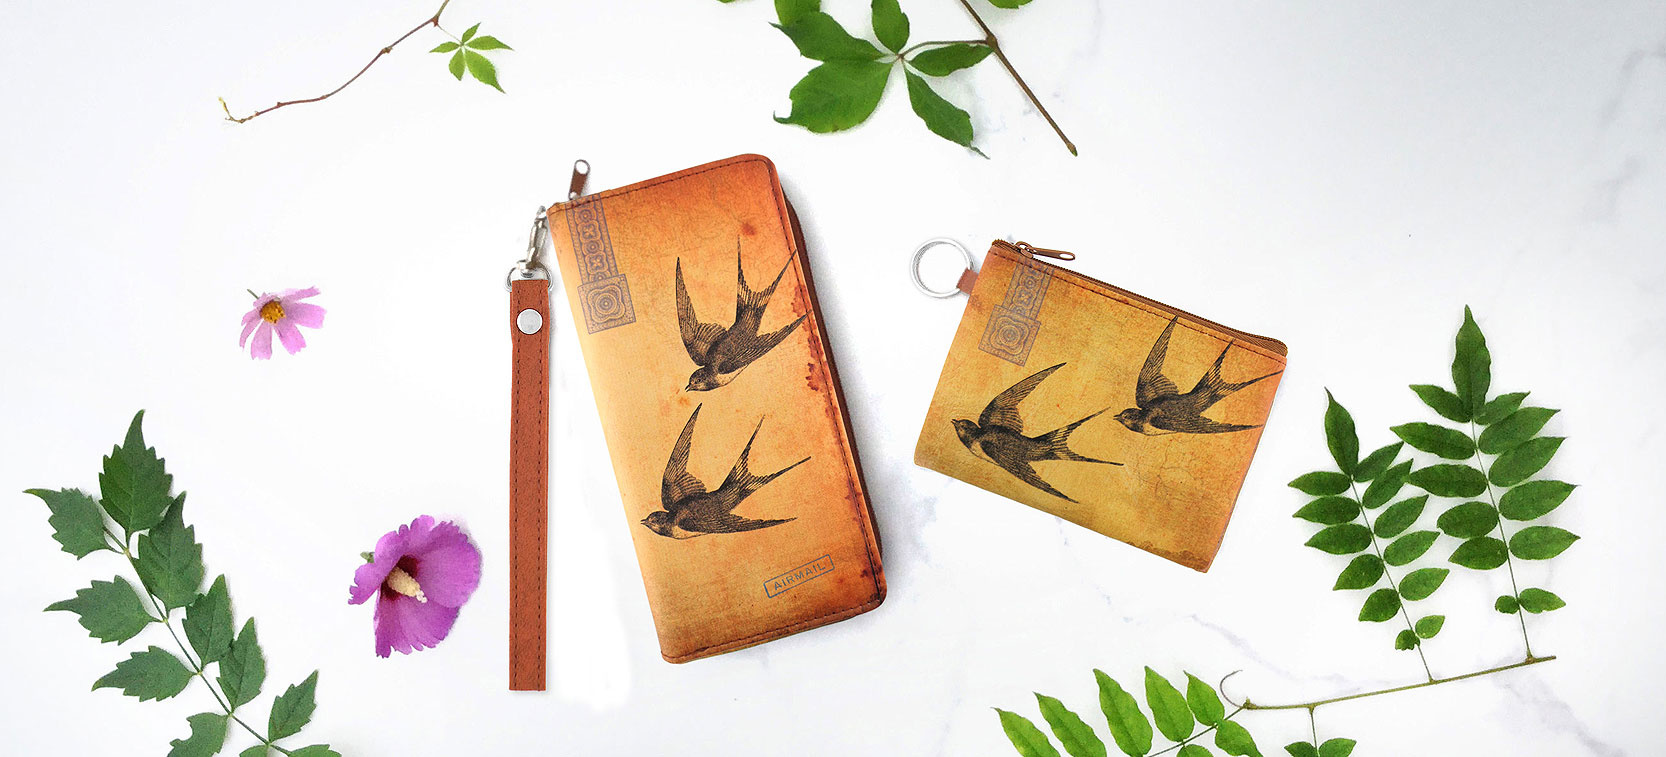 LAVISHY design and wholesale swallow themed vegan accessories and gfits to gift shops, boutiques and book shops, souvenir stores in Canada, USA and worldwide.